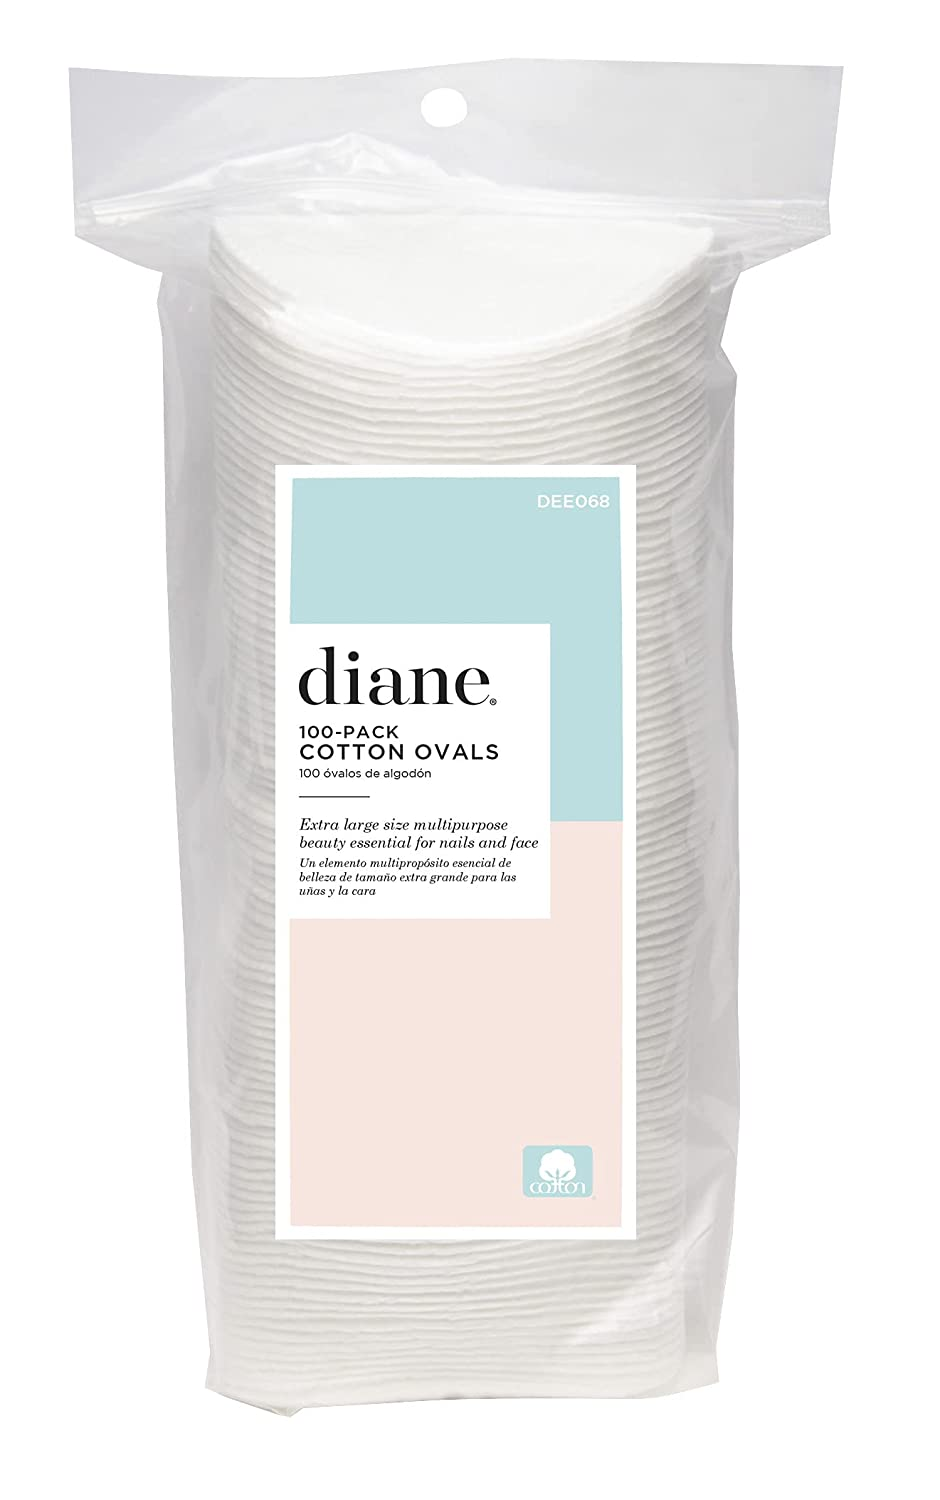 Diane Cotton Swabs - Pack of 375 – 100% Real Cotton Tip Sticks – Soft, Gentle on Face, Makeup, and Beauty Applicator, Nail Polish Removal – 3 Inches Long, DEE031